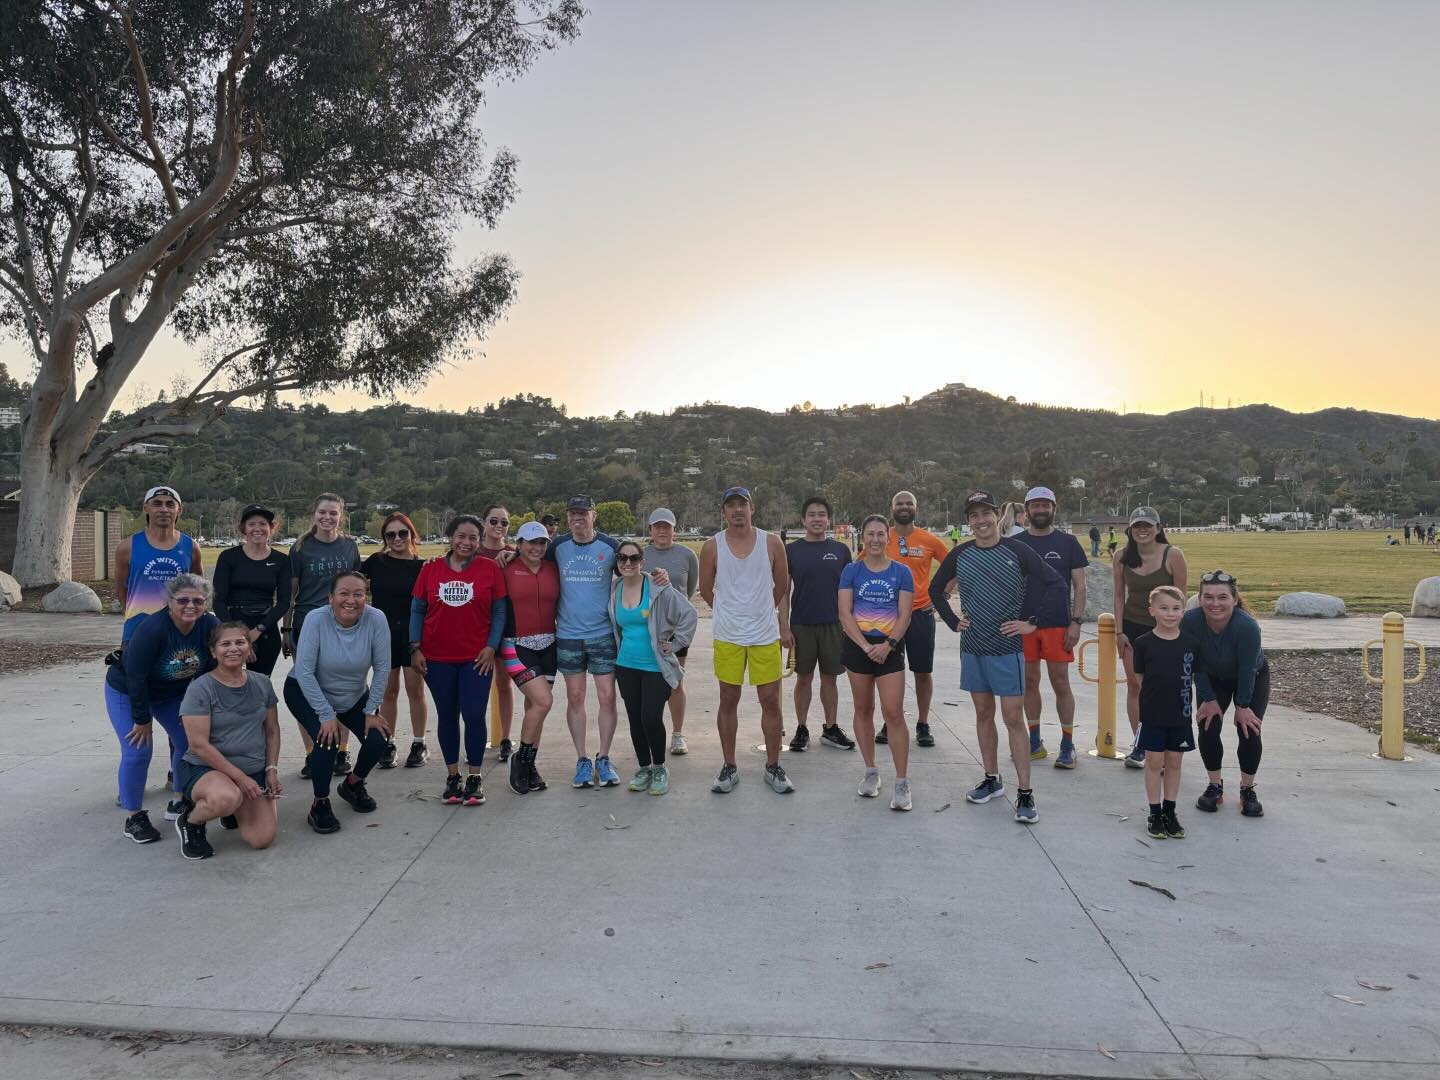 It&rsquo;s the first Monday of the month and that means we&rsquo;re heading over to our favorite place to log some miles&hellip; the Rose Bowl!! Grab a friend and join us as we kick off the week with some easy miles. 

📍 We will be meeting in LOT F,